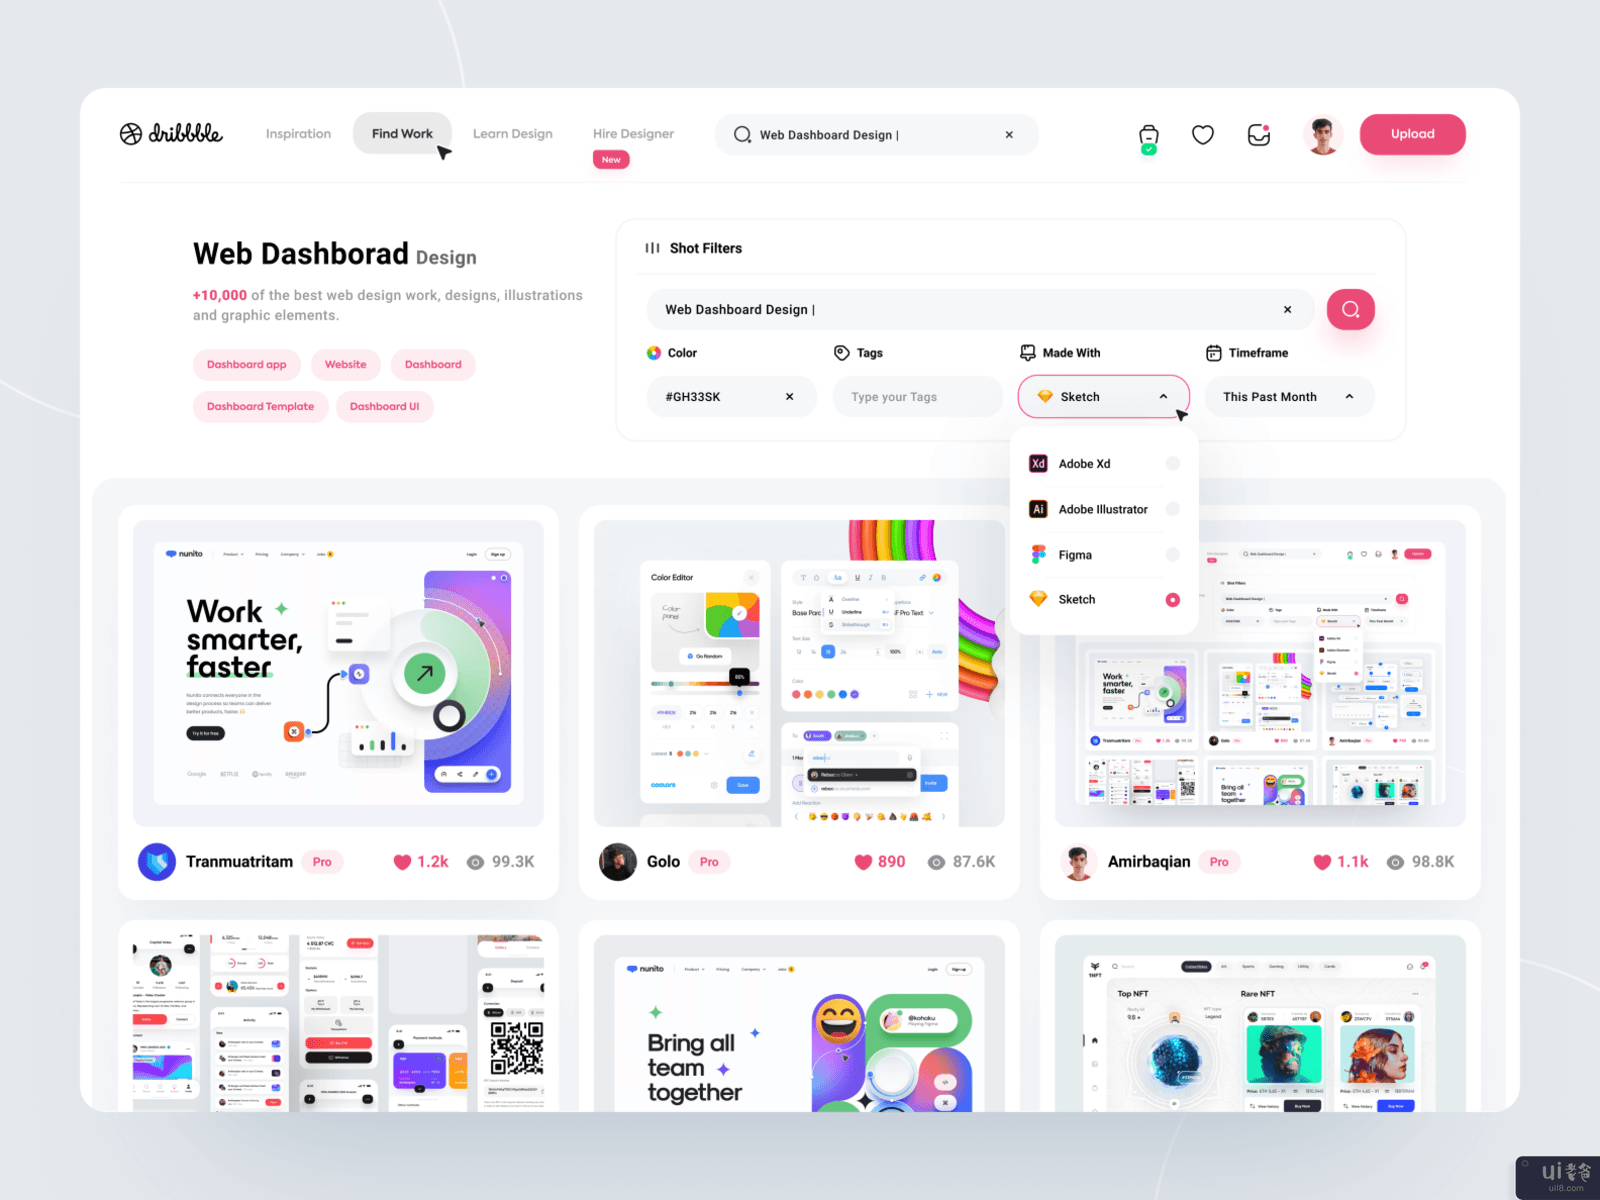 Dribbble重新设计 - 搜索页面(Dribbble Redesign - Search Page)插图1